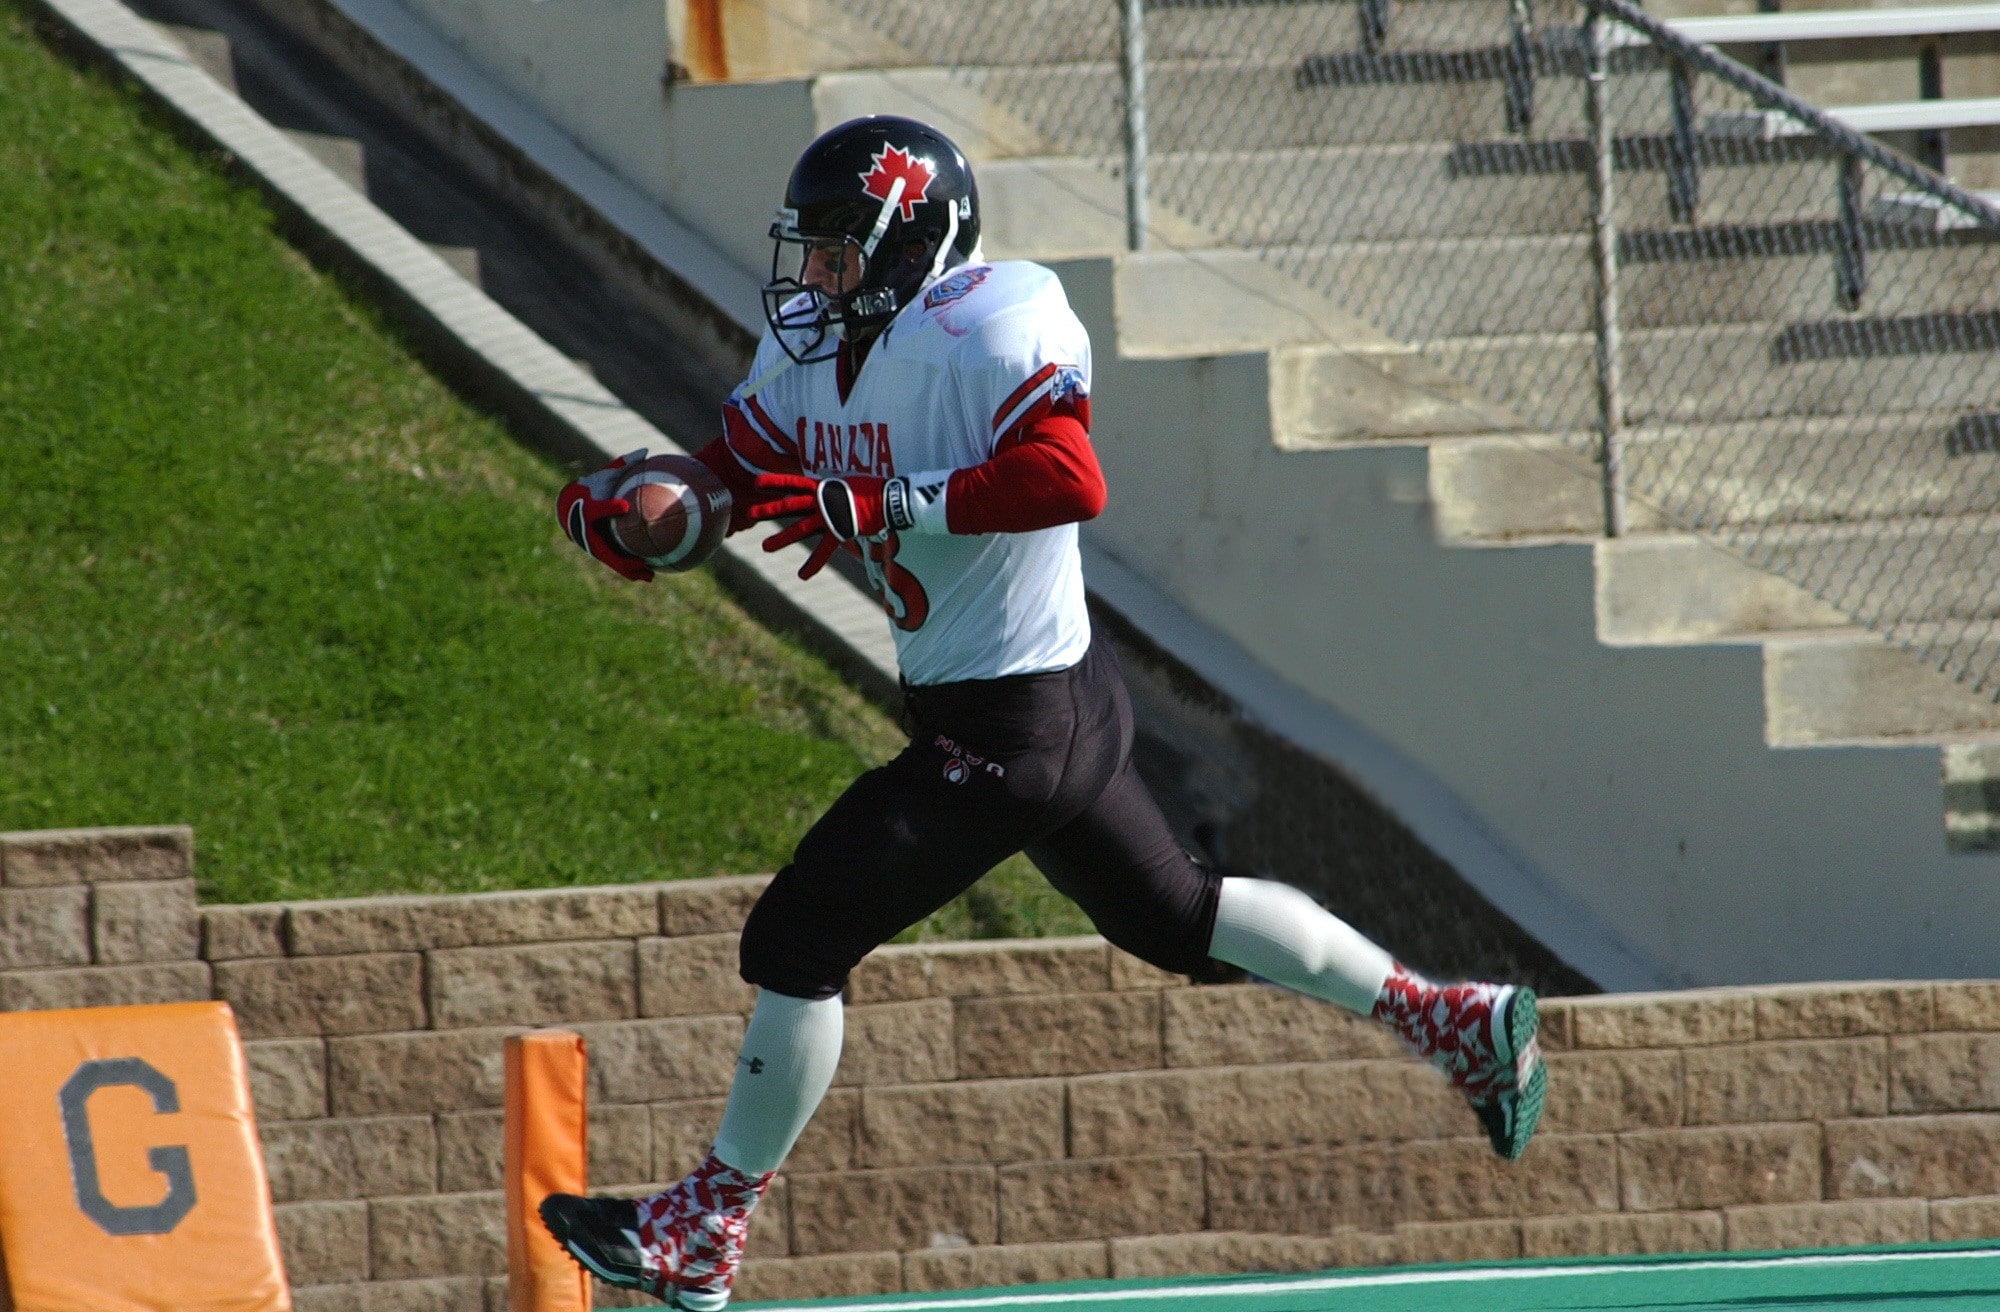 football player running wearing black helmet with red maple leaf logo